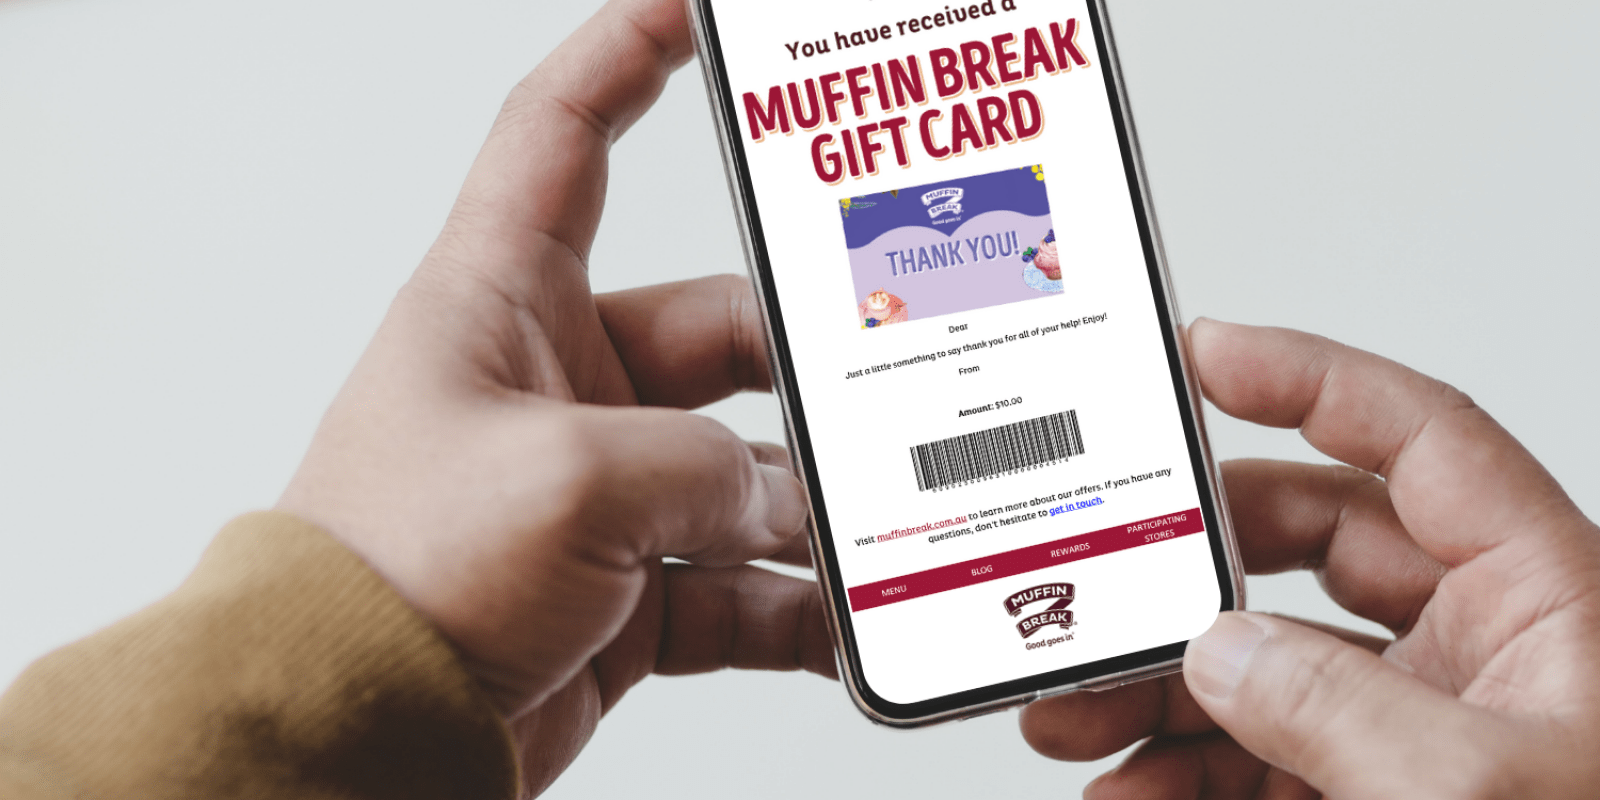 Corporate Gifting available at Muffin Break